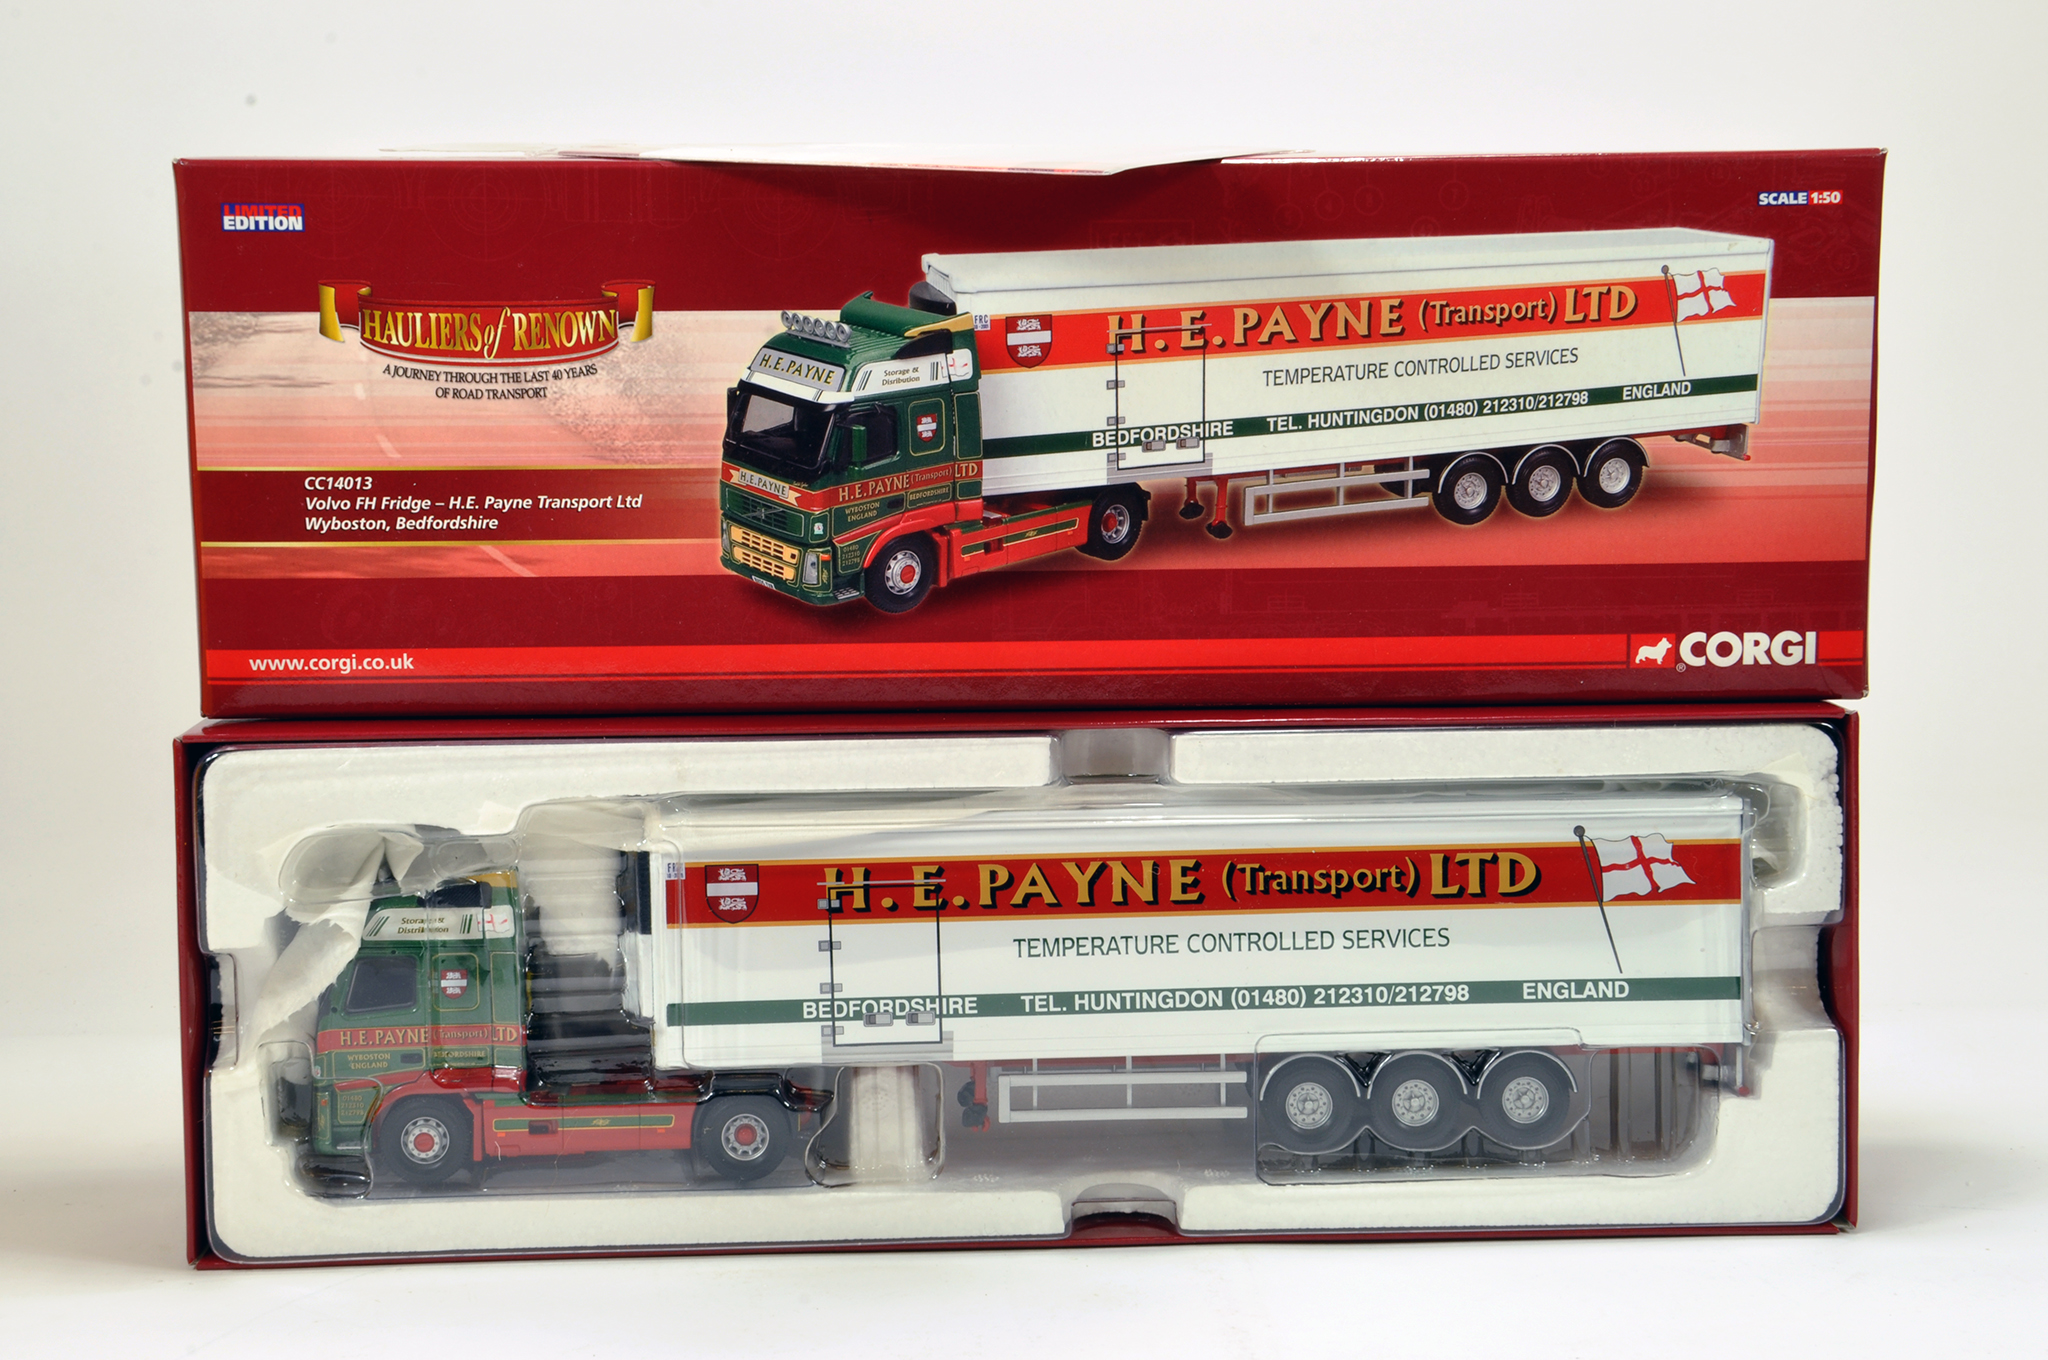 Corgi Diecast Truck Issue comprising No. CC14013 Volvo FH refrigerator trailer in the livery of HE